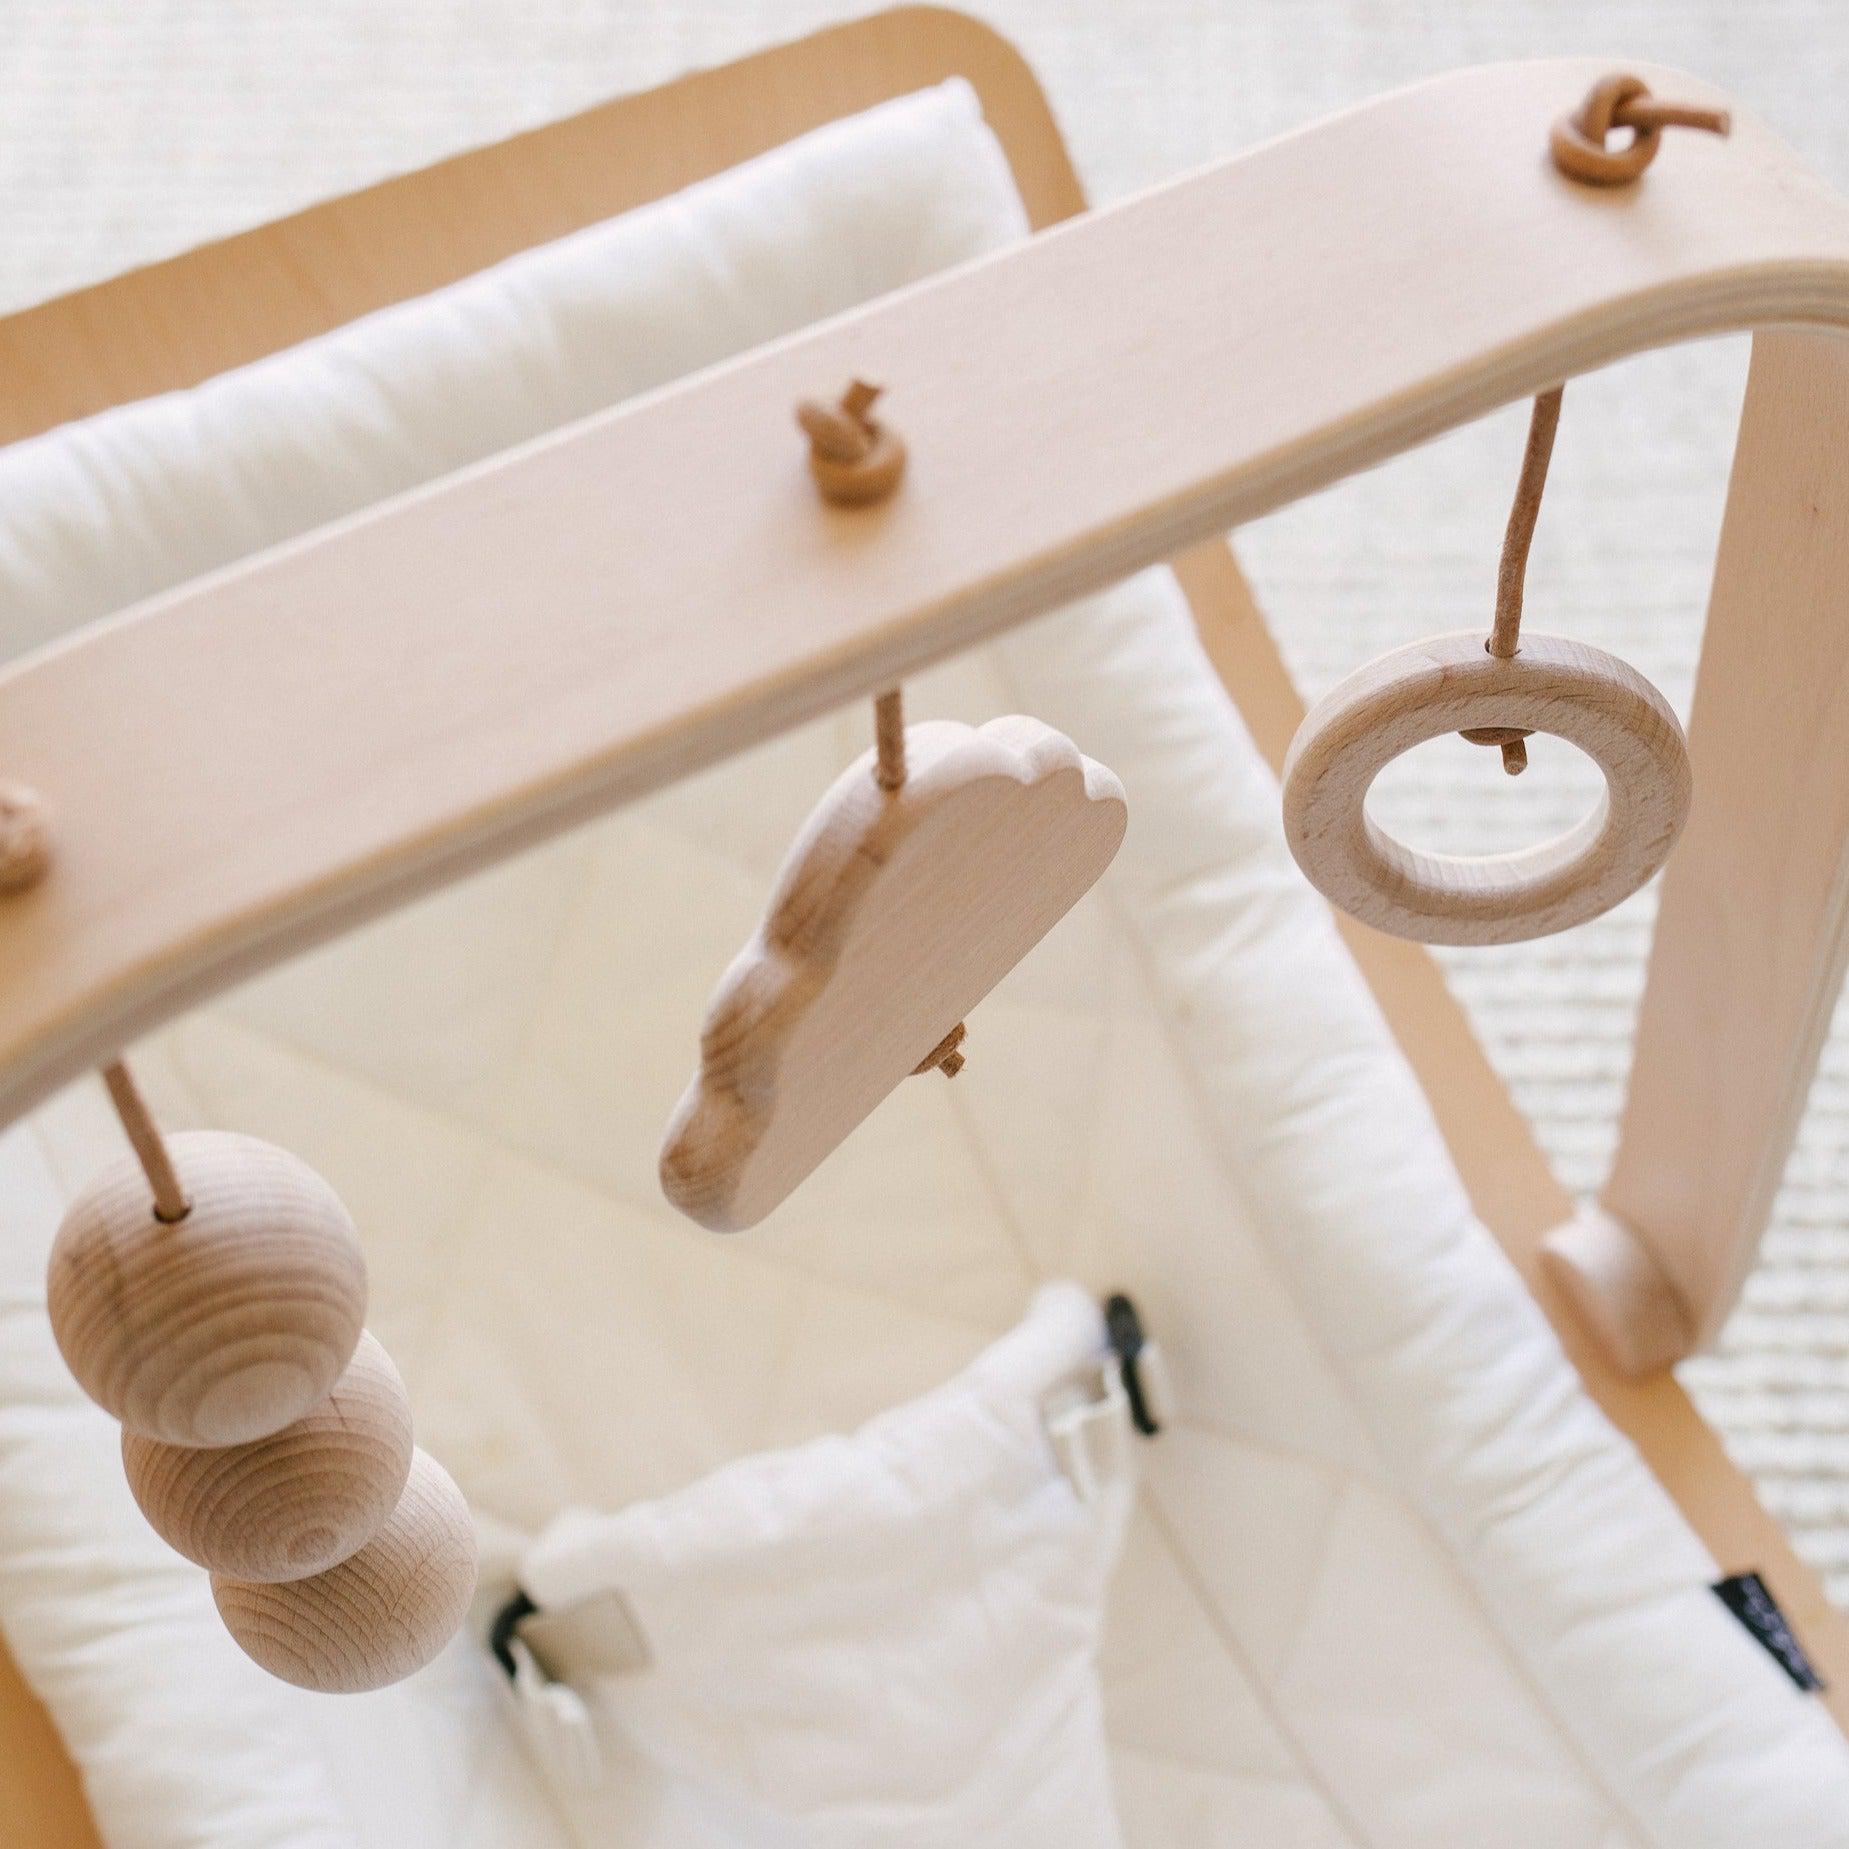 Designed especially to attach to the Charlie Crane Levo Rocker the wooden Activity Arch is ideal to stimulate babies from birth. The natural wooden toys; cloud, ring and beads will entertain your child in their Levo Rocker.